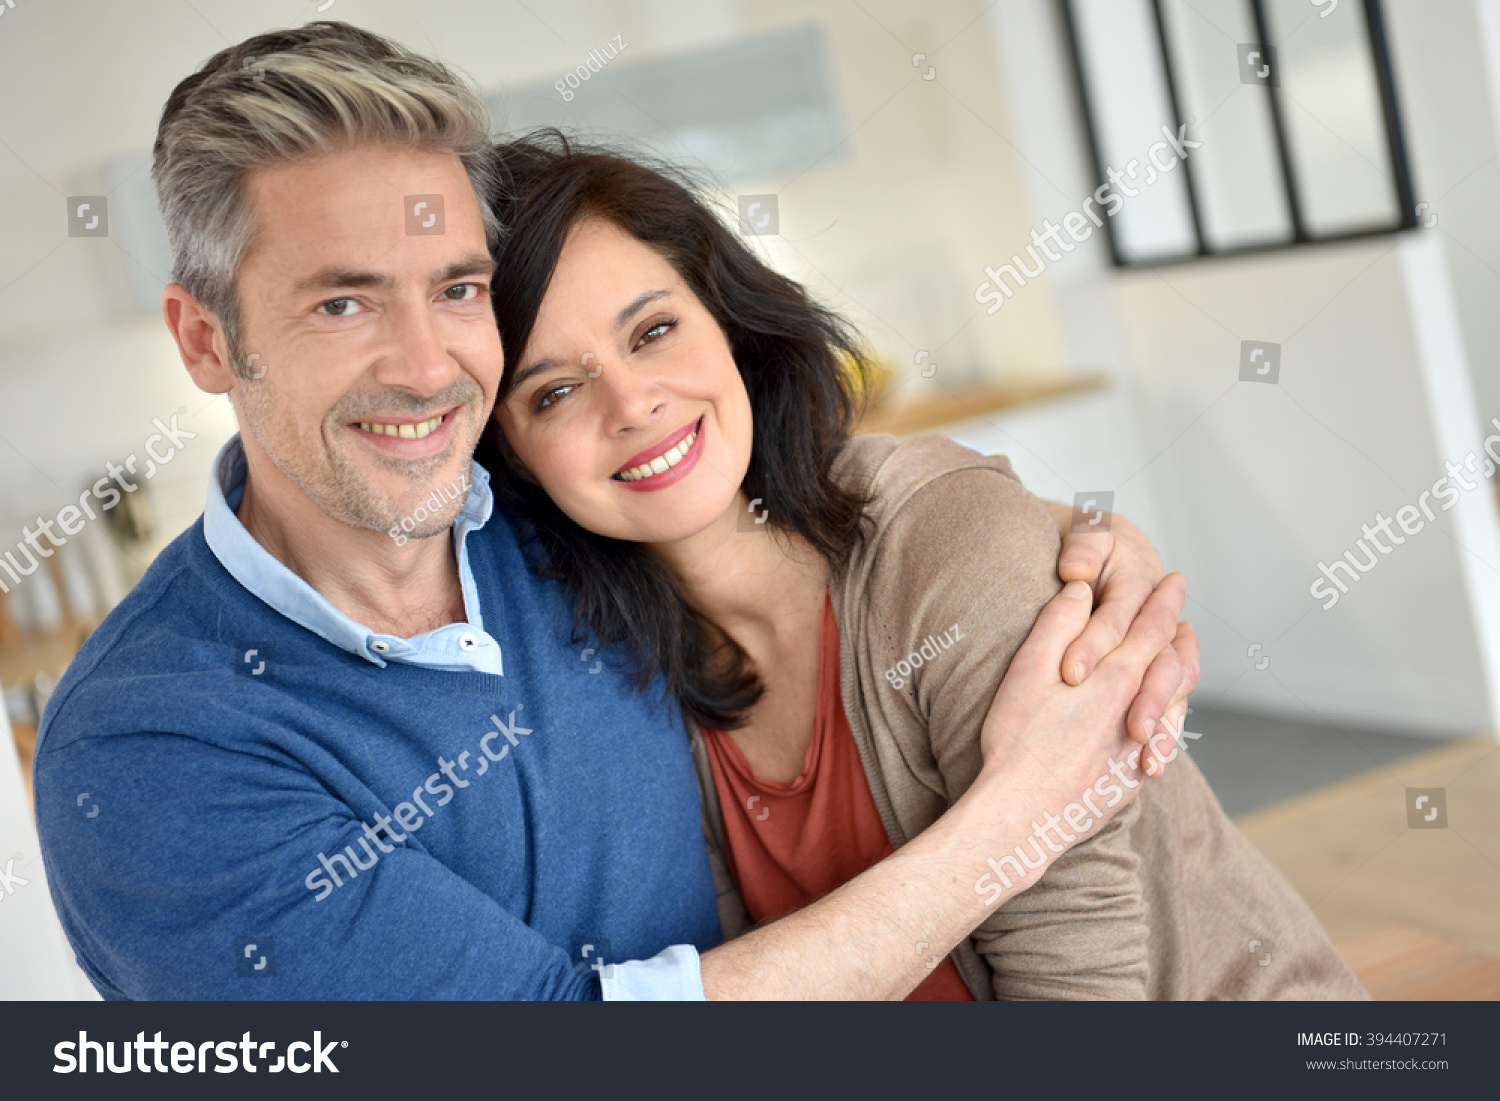 Middle-aged couple embracing each other #394407271